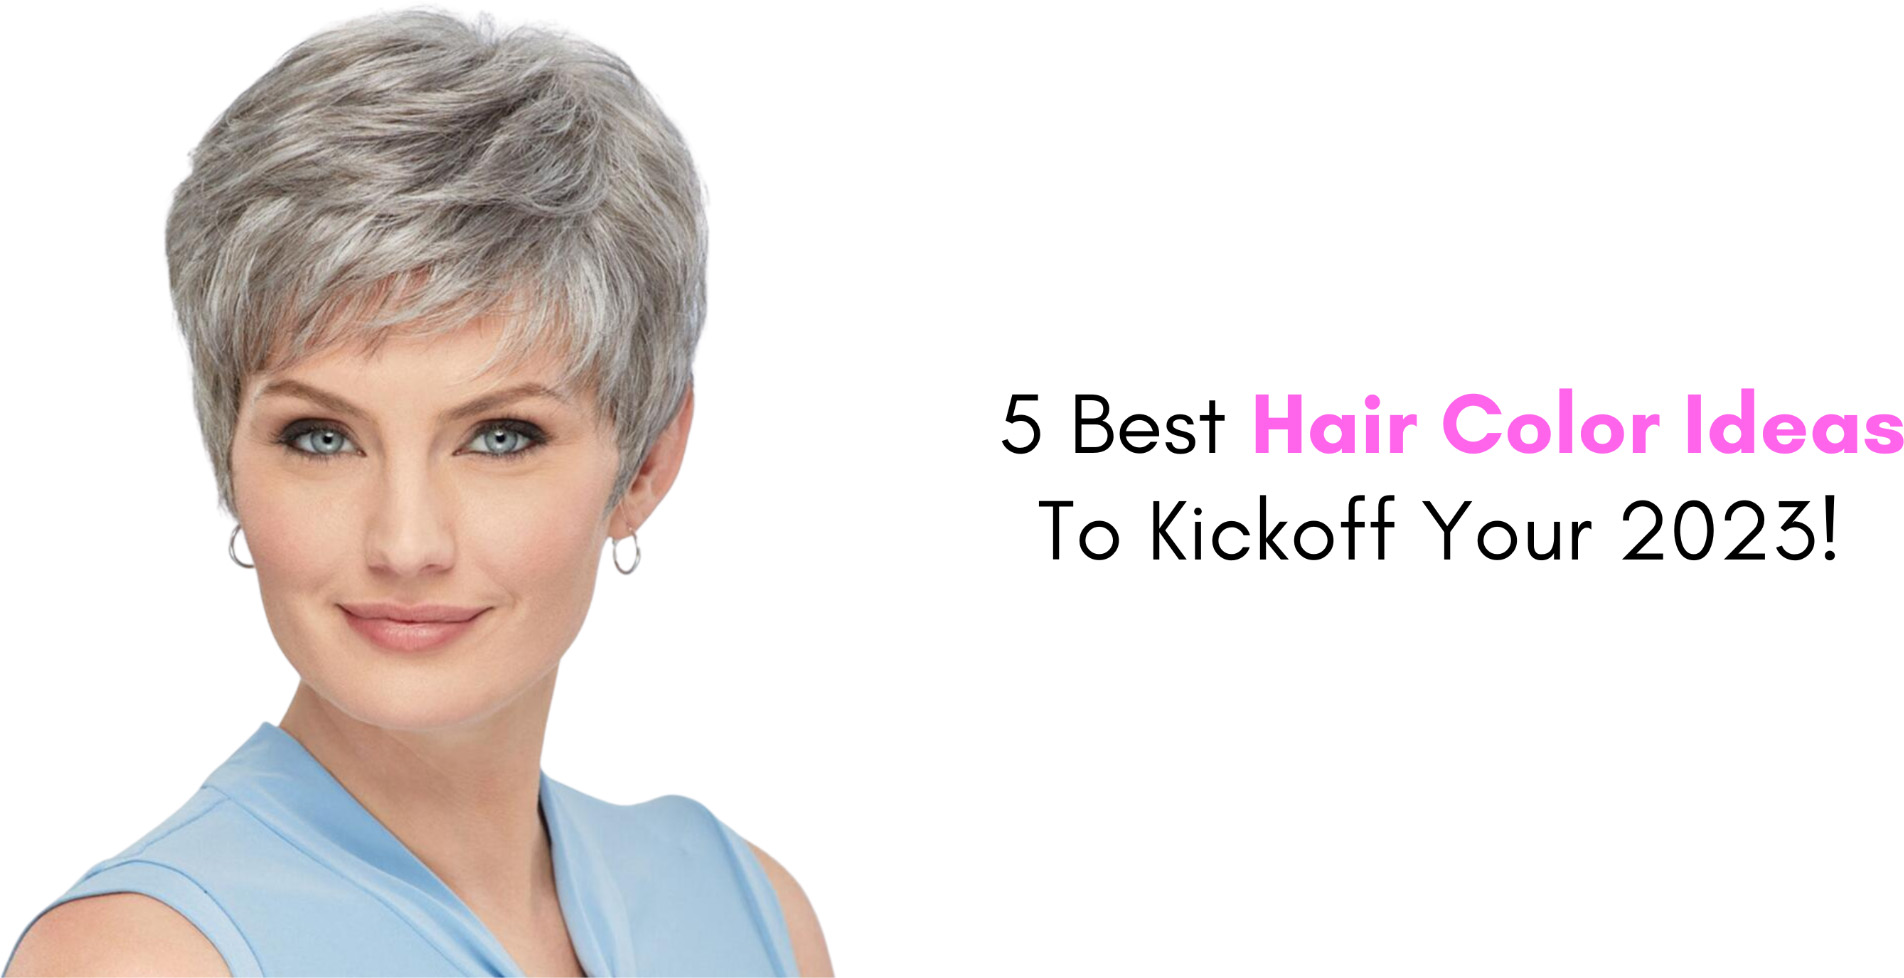 5 best hair color ideas to kickoff your 2023